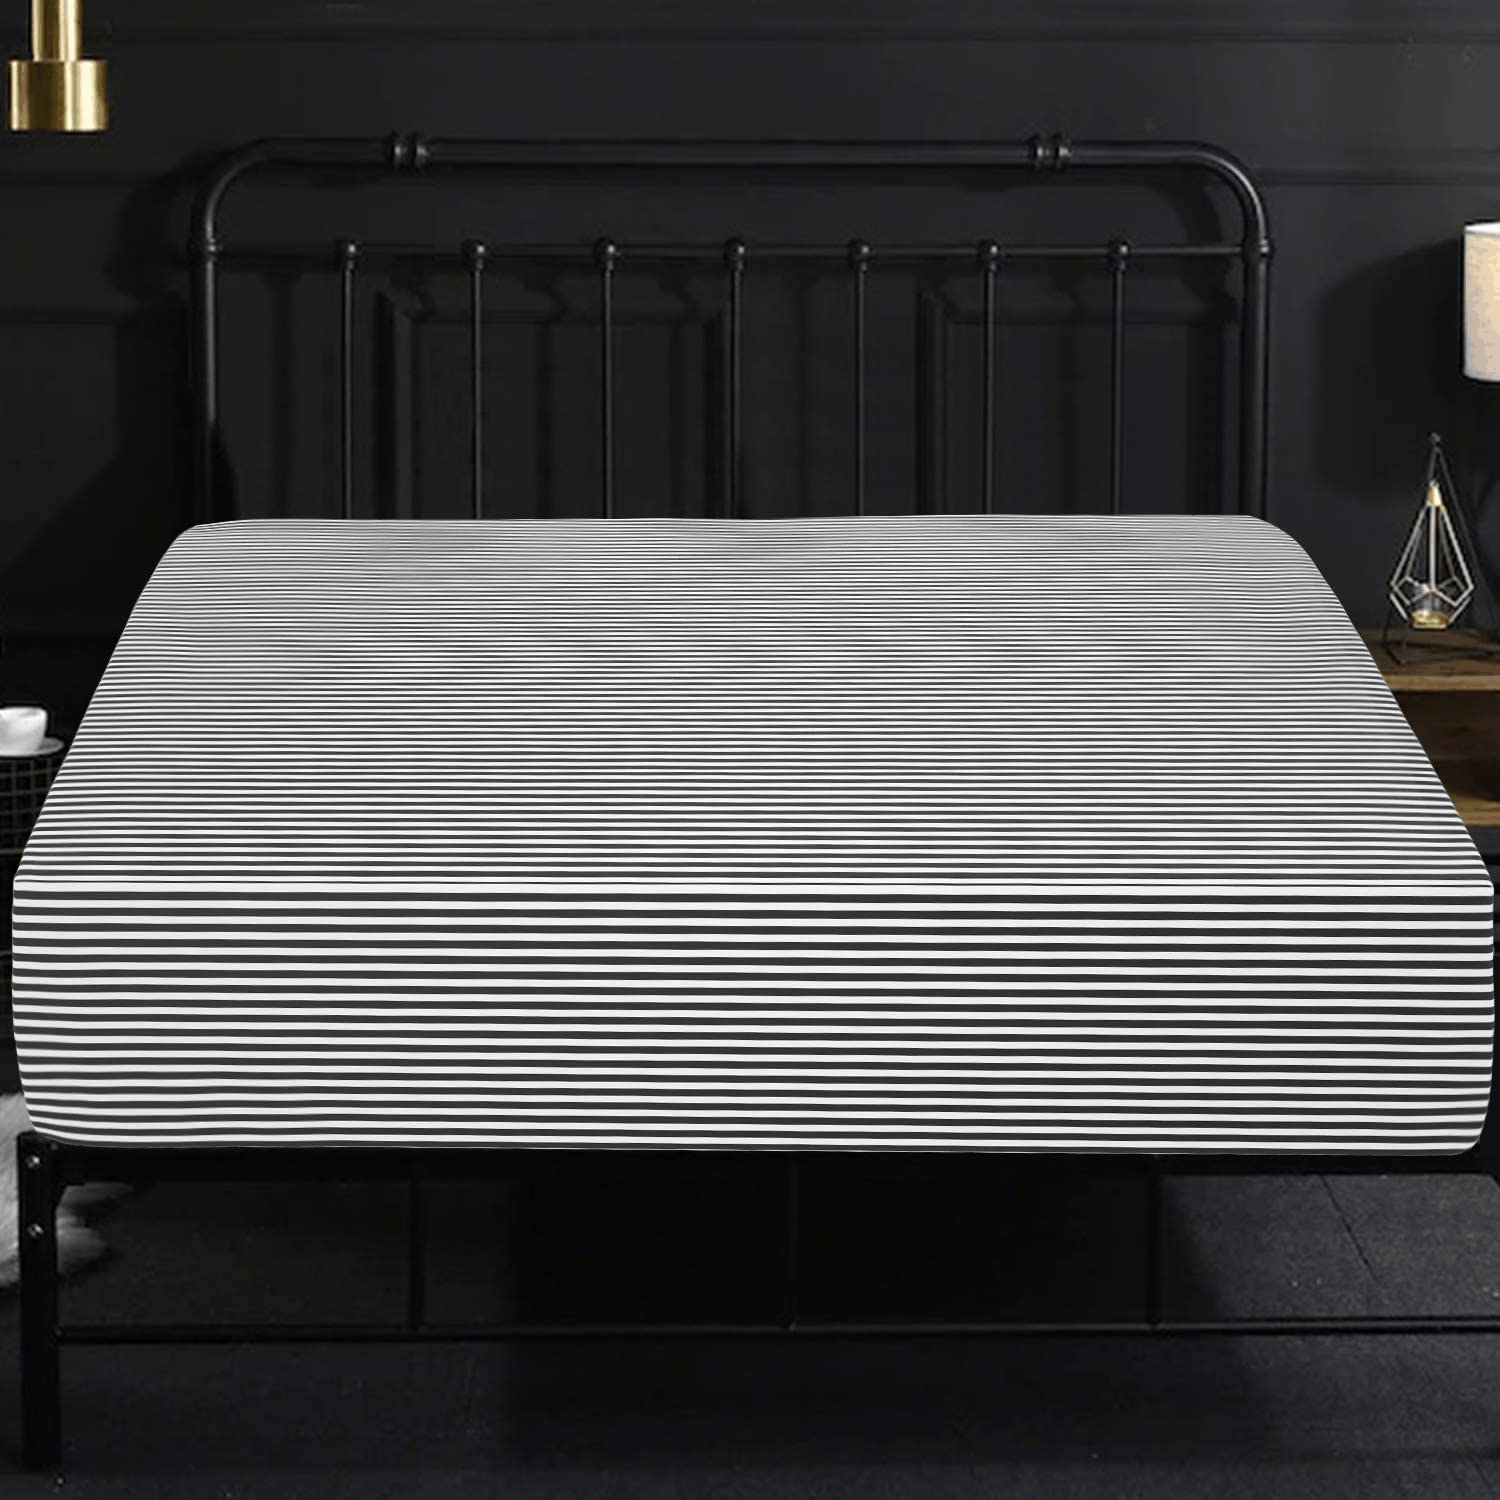 10 Bed Skirt Alternatives Pros Cons, How To Hide Metal Bed Frame